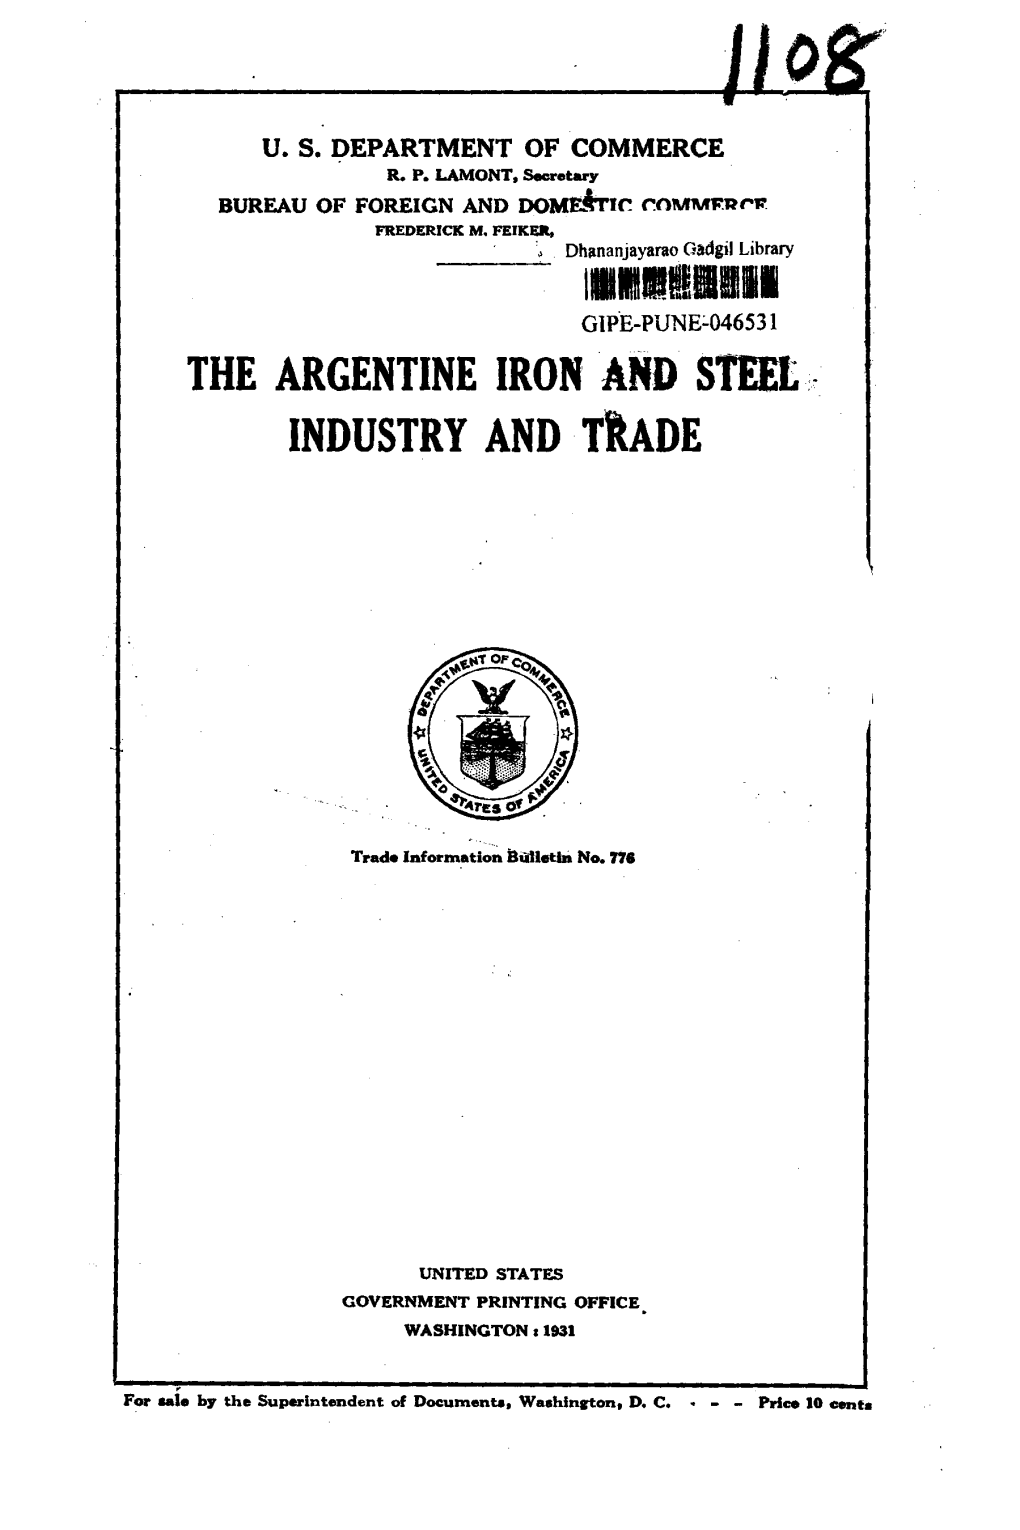 THE ARGENTINE IRON and Steet INDUSTRY and Tftade